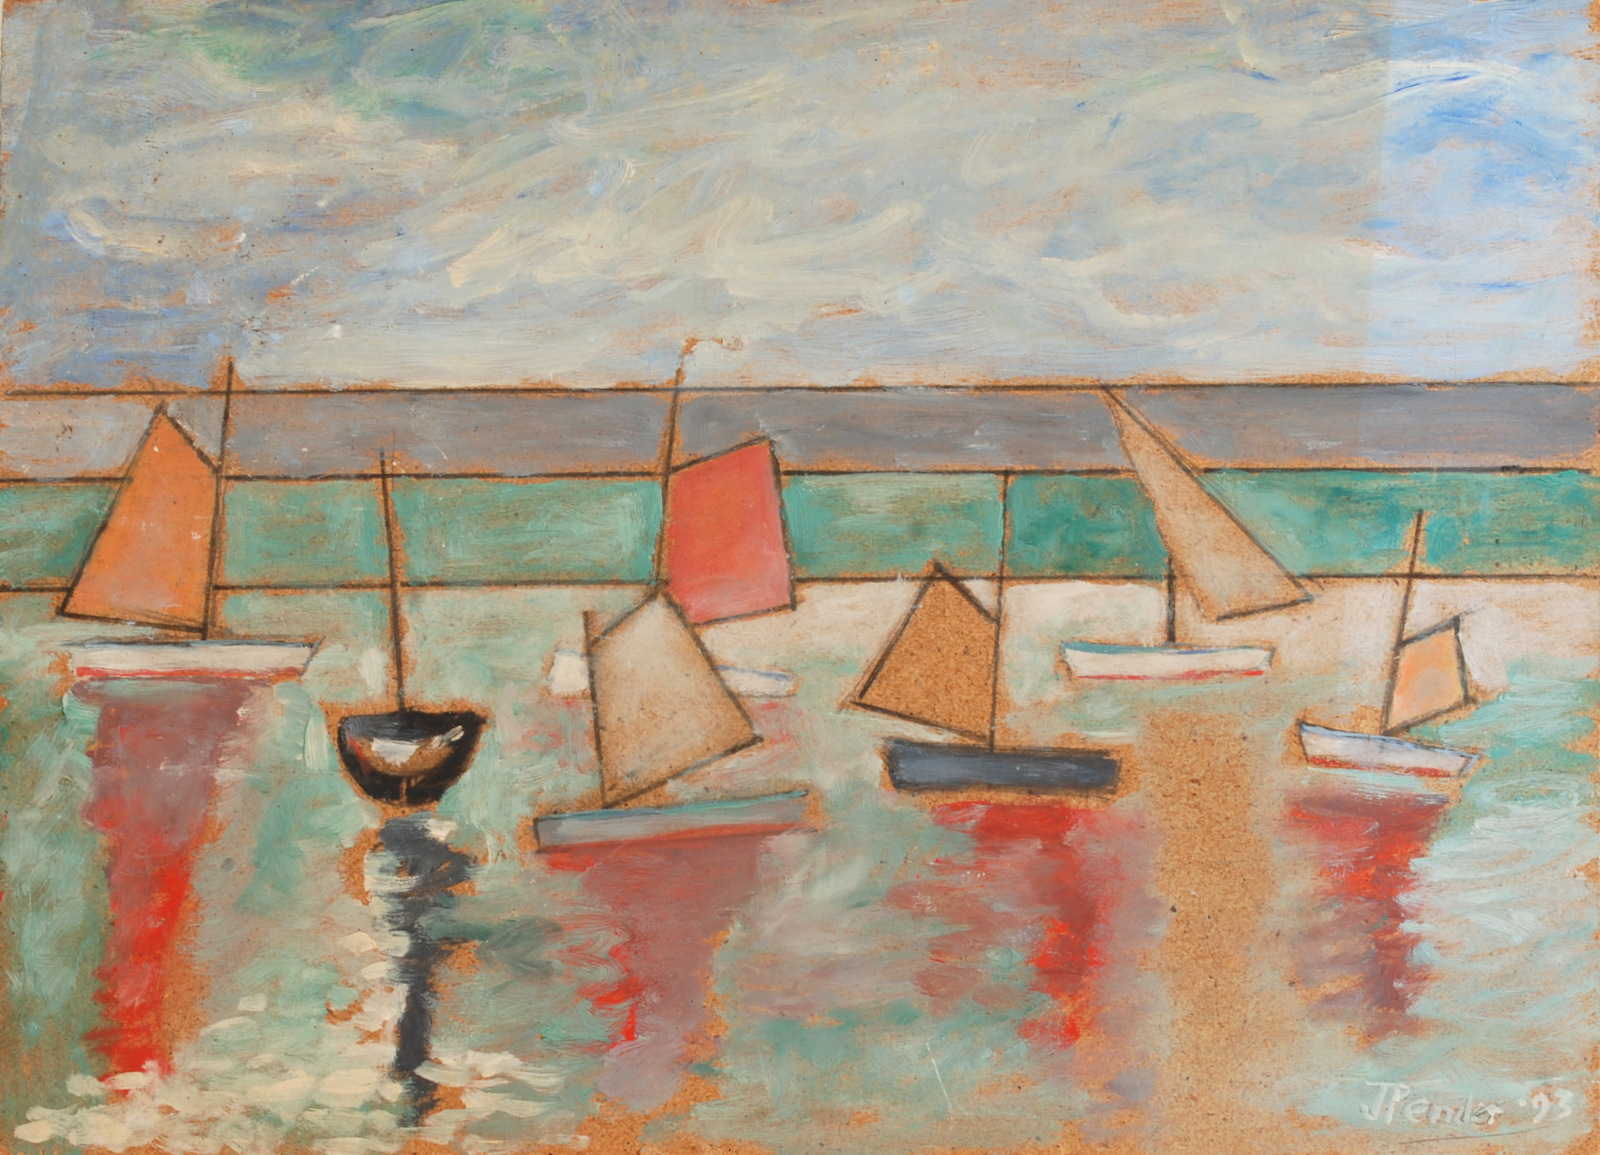 JACK PENDER Seven Boats in A Harbour Oil on board Signed and dated 1993 25 x 34 cm